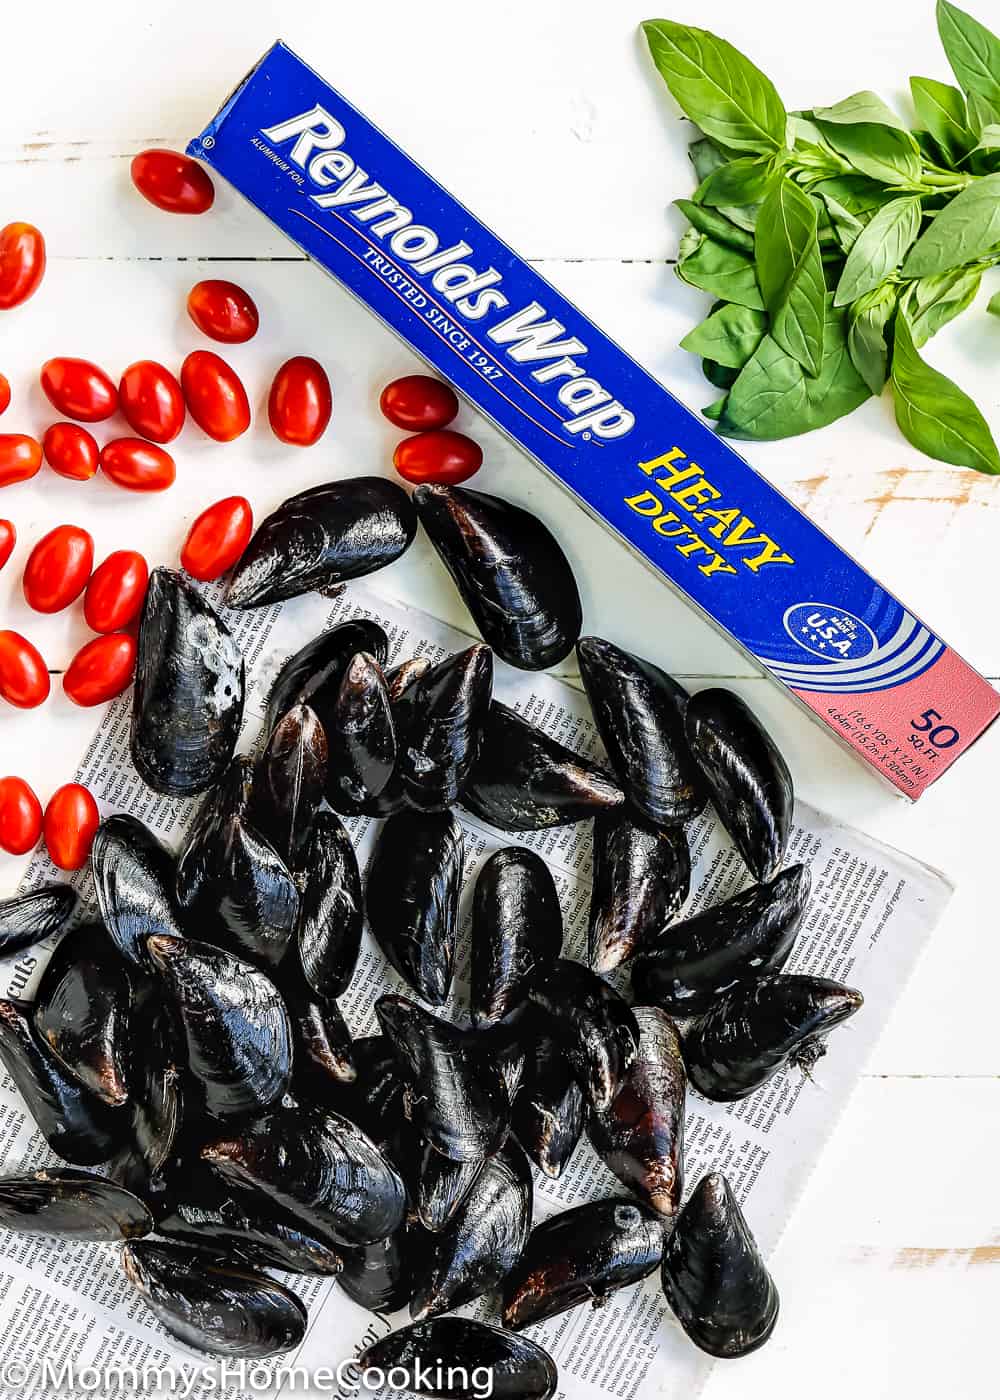 fresh mussels, tomatoes and a roll of foil